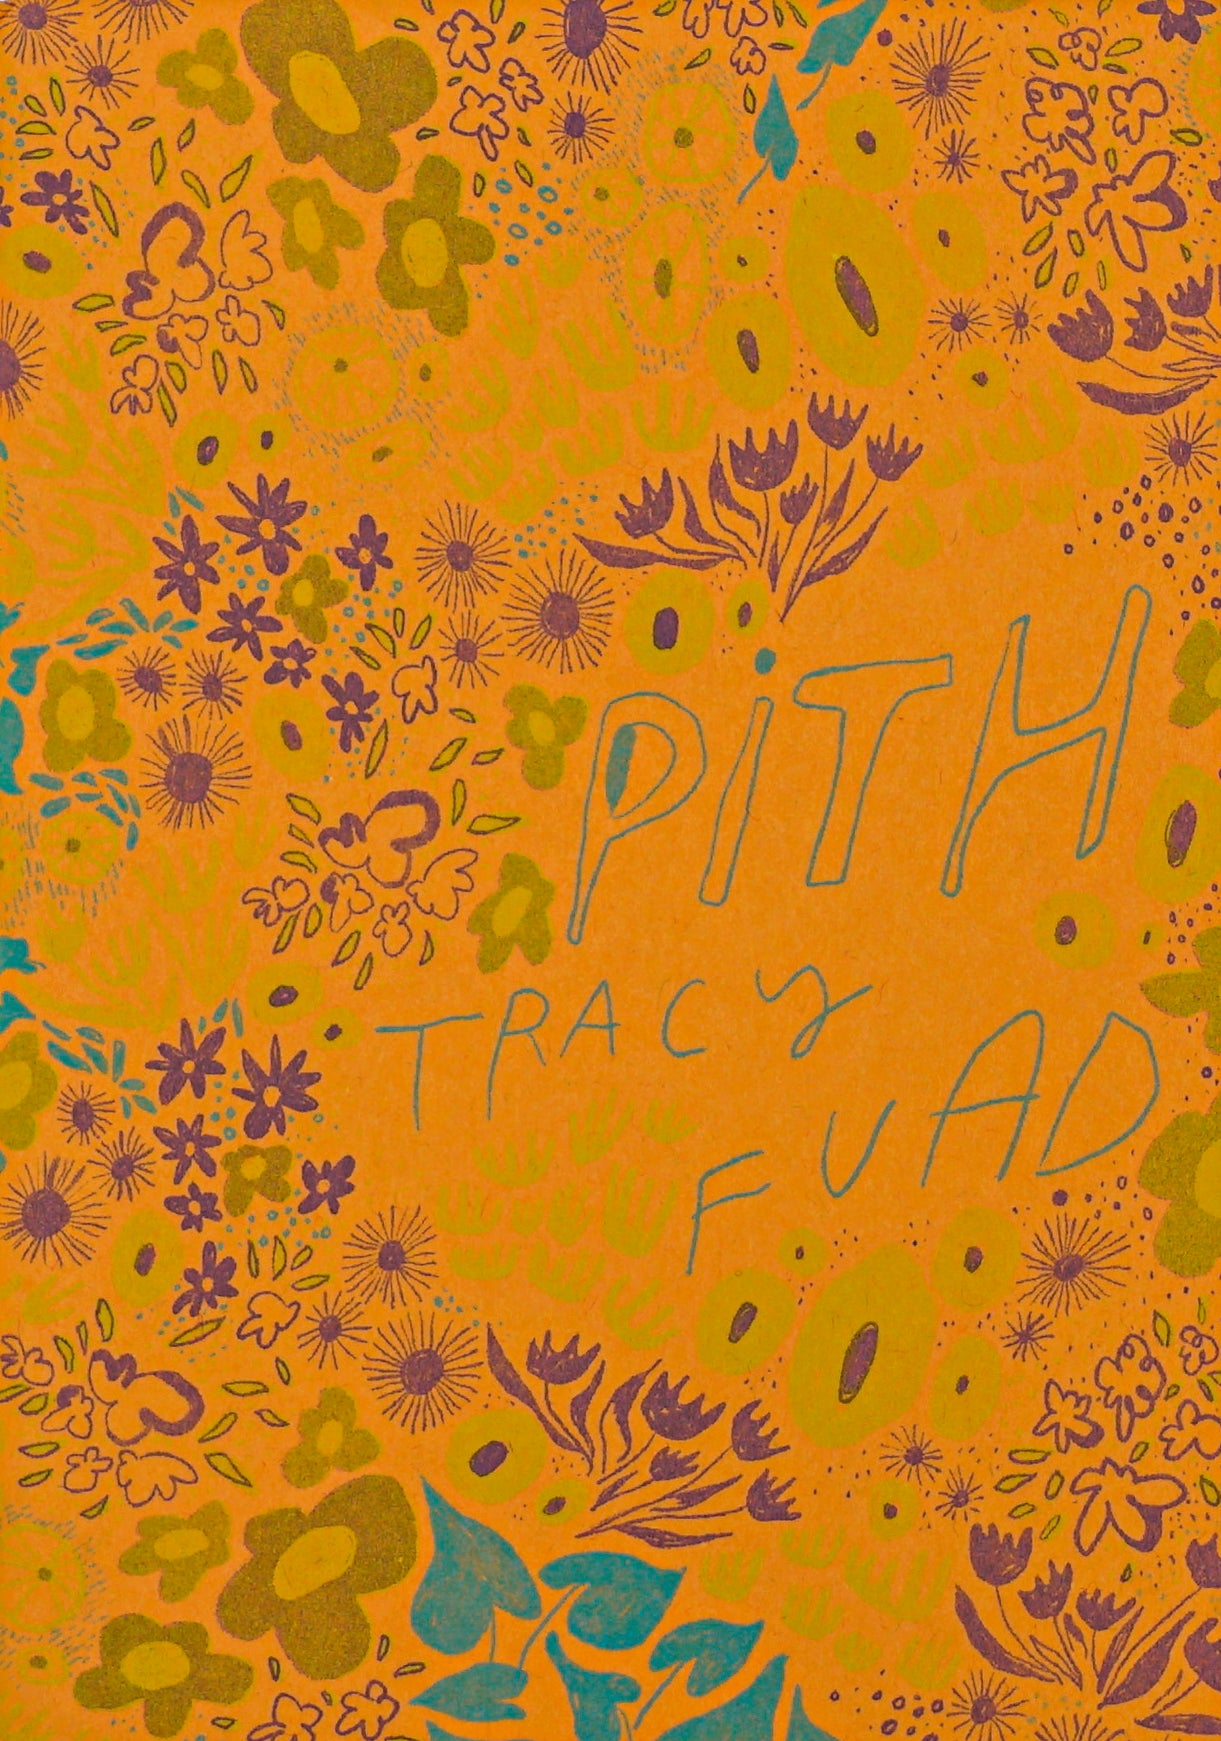 Orange backdrop with floral illustrations in olive green yellow purple and pale blue with PiTH Tracy Fuad in blue handwritten type